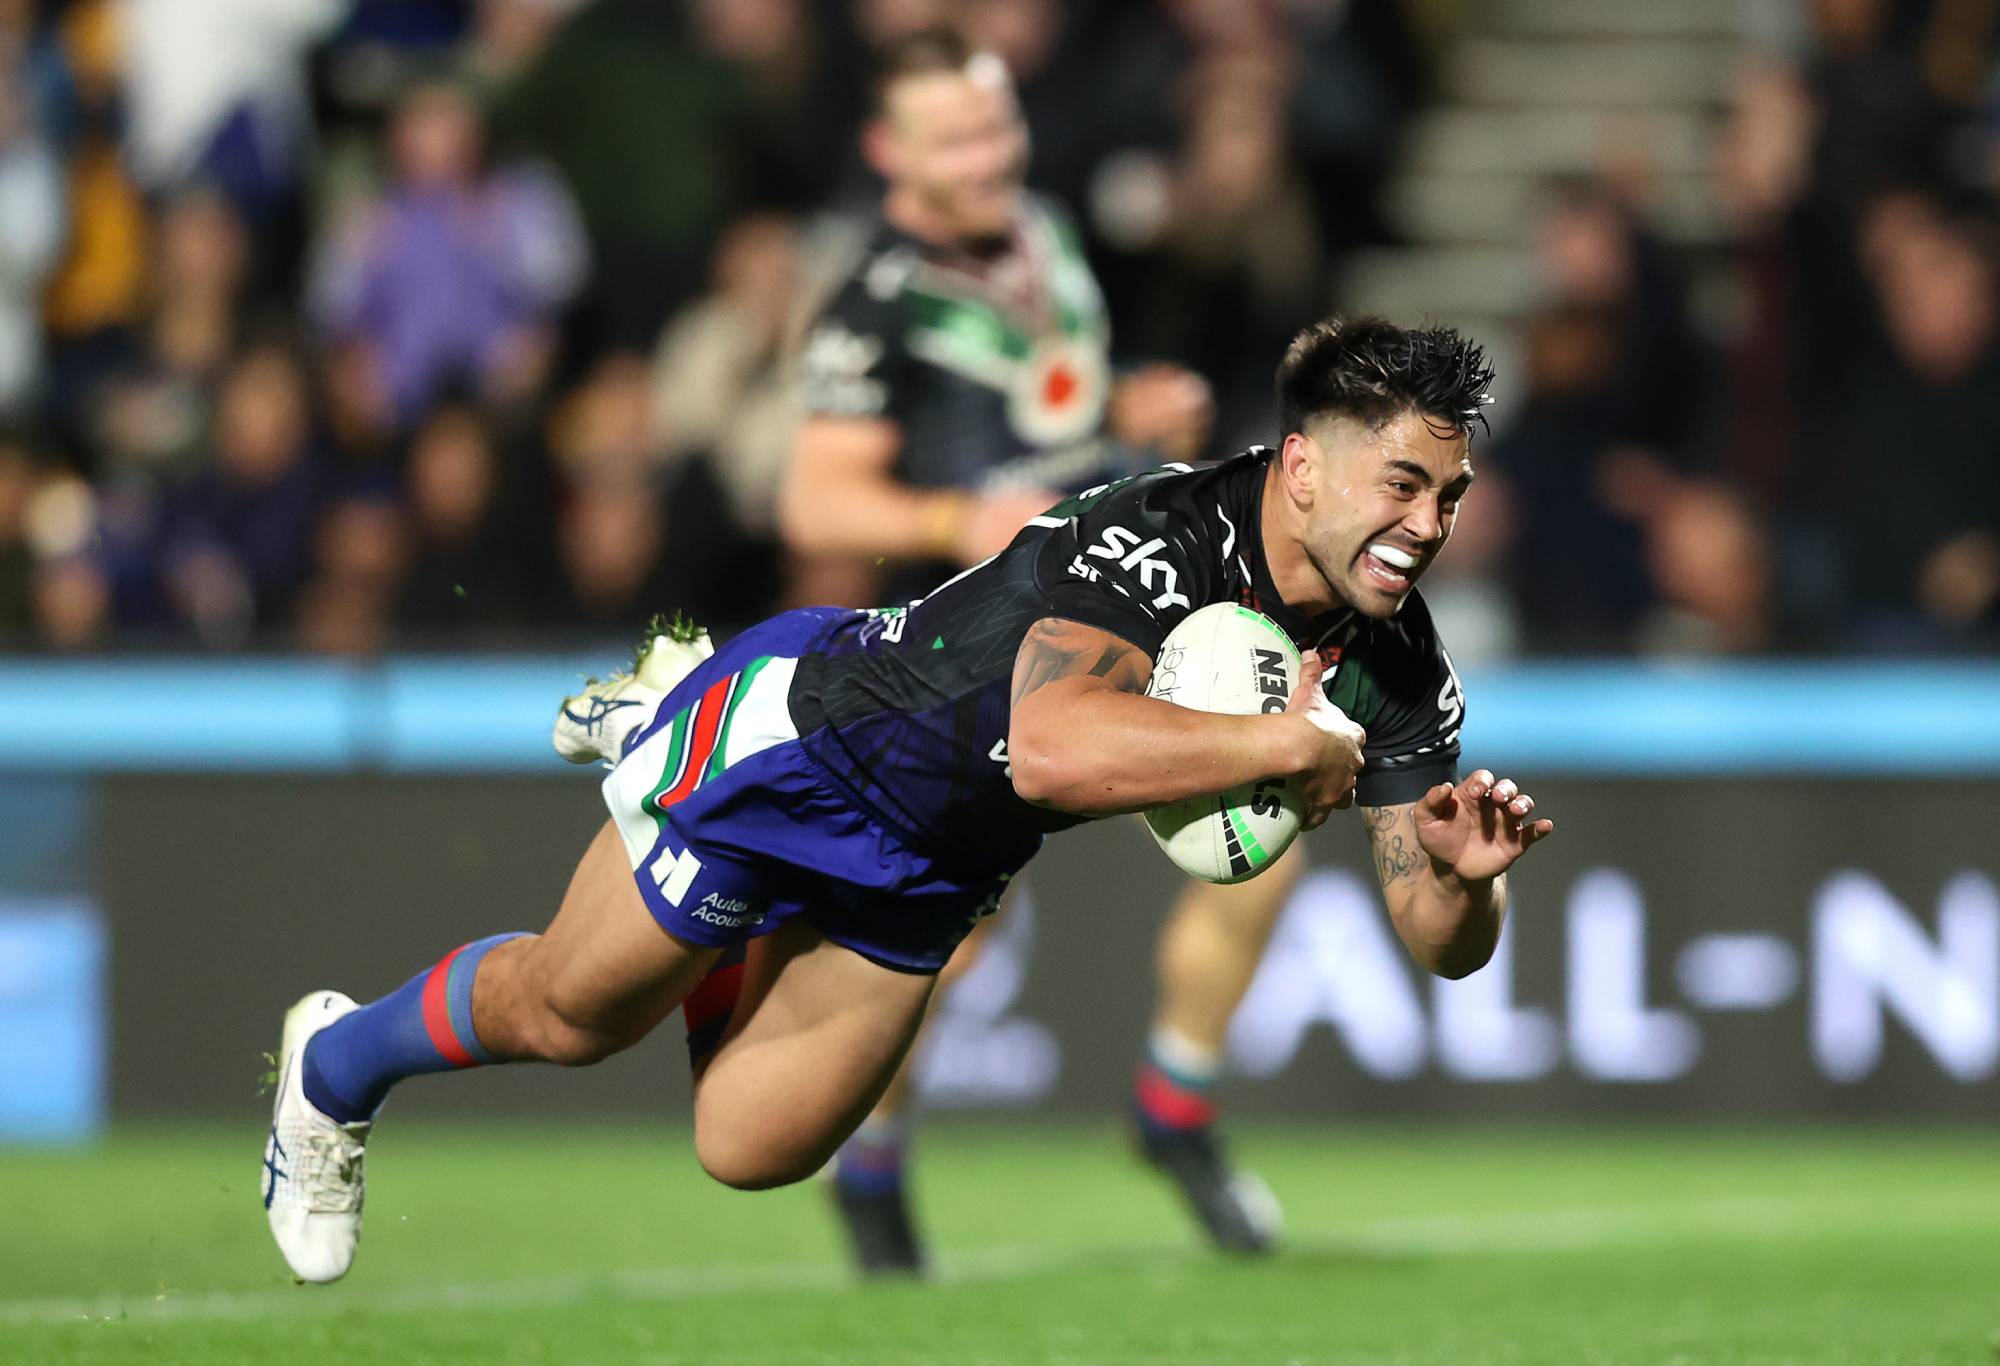 AUCKLAND, NEW ZEALAND - AUGUST 12: Shaun Johnson of the Warriors makes a break to score a try during the round 22 NRL match between the New Zealand Warriors and the Canterbury Bulldogs at Mt Smart Stadium on August 12, 2022, in Auckland, New Zealand. (Photo by Phil Walter/Getty Images)